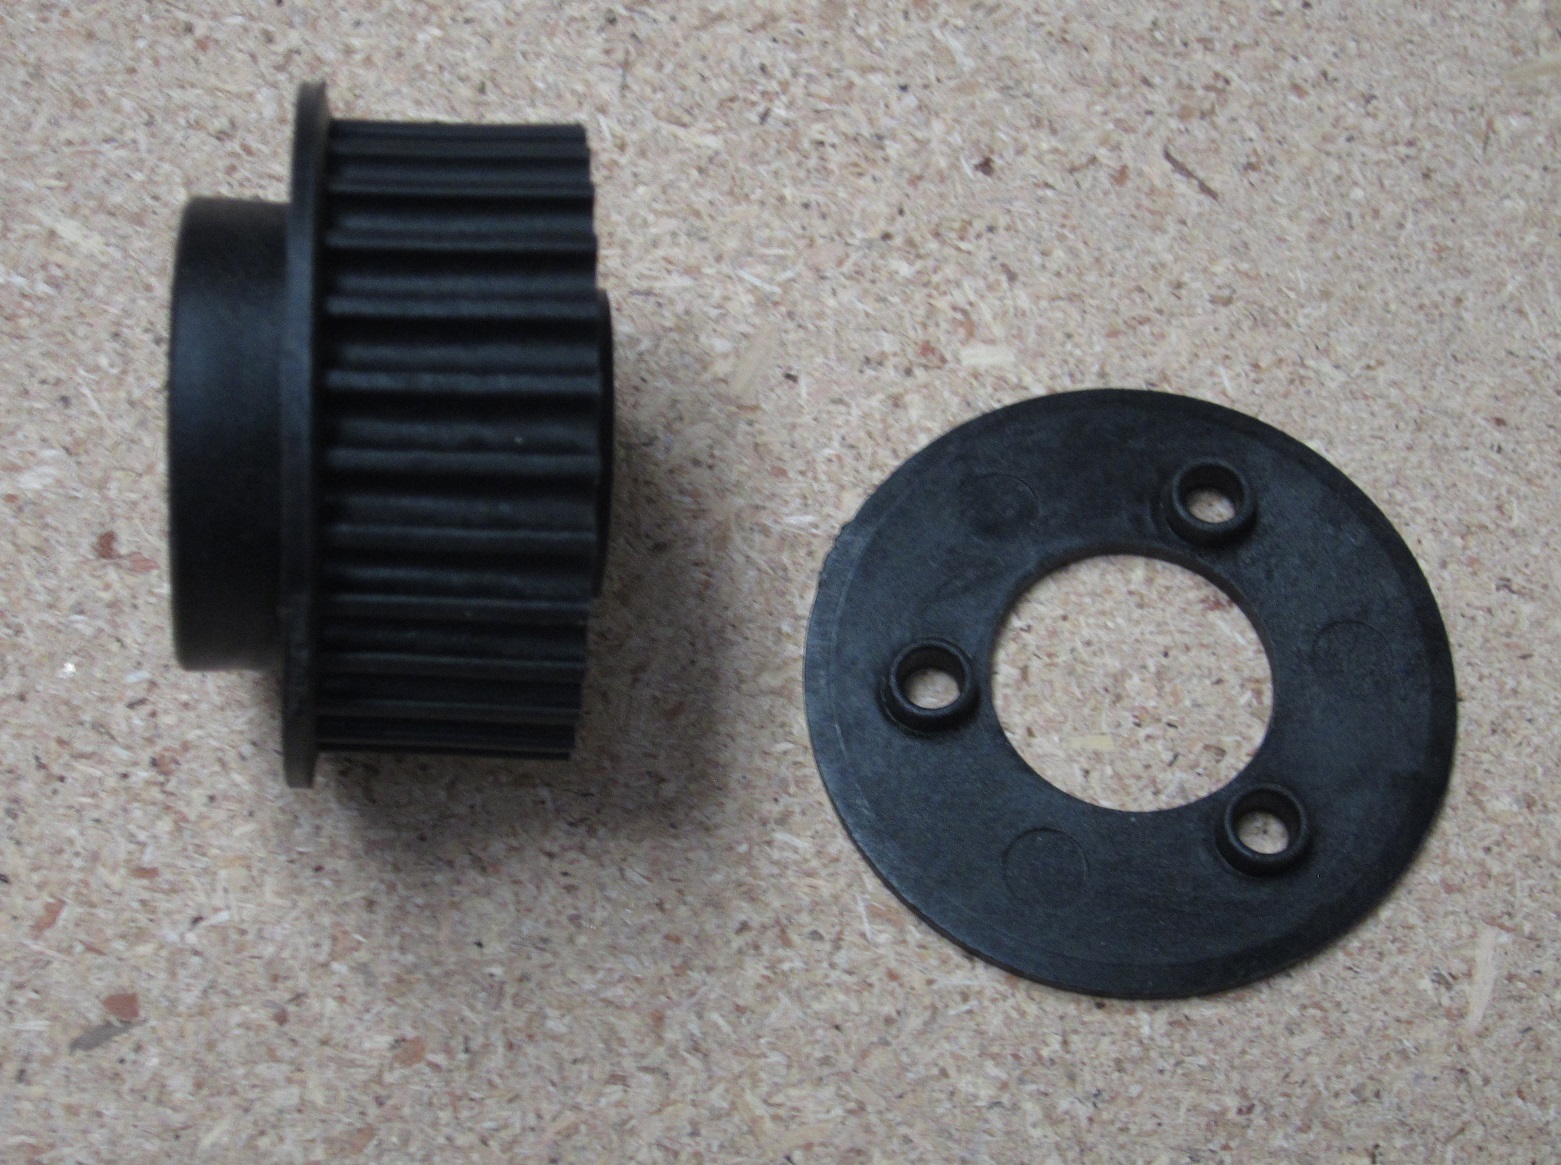 Pulley - Motor drive molded plastic